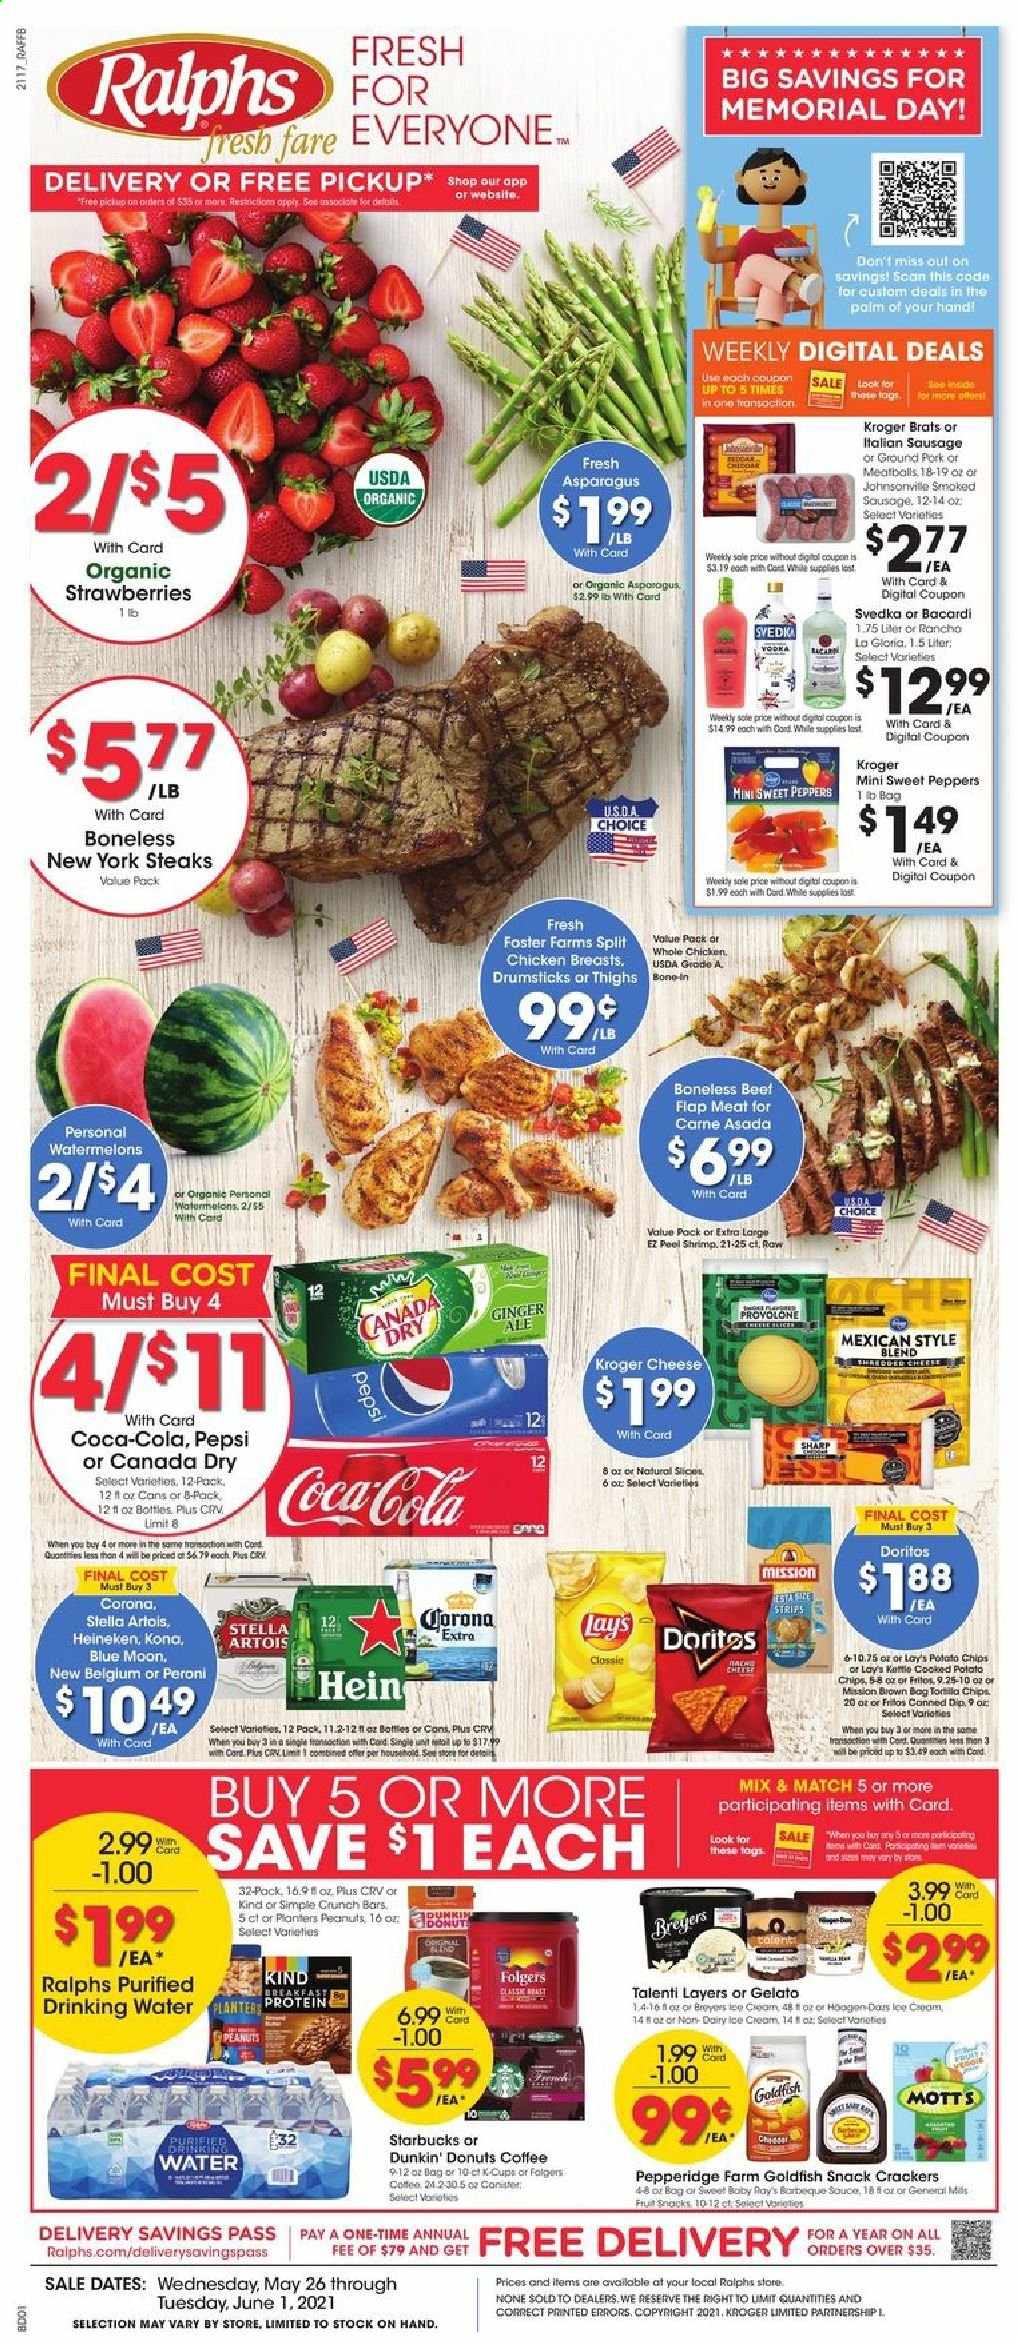 thumbnail - Ralphs Flyer - 05/26/2021 - 06/01/2021 - Sales products - Dunkin' Donuts, asparagus, ginger, sweet peppers, peppers, strawberries, Mott's, shrimps, Johnsonville, italian sausage, dip, Talenti Gelato, gelato, strips, snack, crackers, Doritos, Fritos, potato chips, chips, Lay’s, Goldfish, peanuts, Planters, Canada Dry, Coca-Cola, Pepsi, coffee, Starbucks, Folgers, coffee capsules, K-Cups, Bacardi, beer, Stella Artois, Blue Moon, Corona Extra, Heineken, Peroni, whole chicken, chicken breasts, steak, ground pork, Sharp, Lee. Page 1.